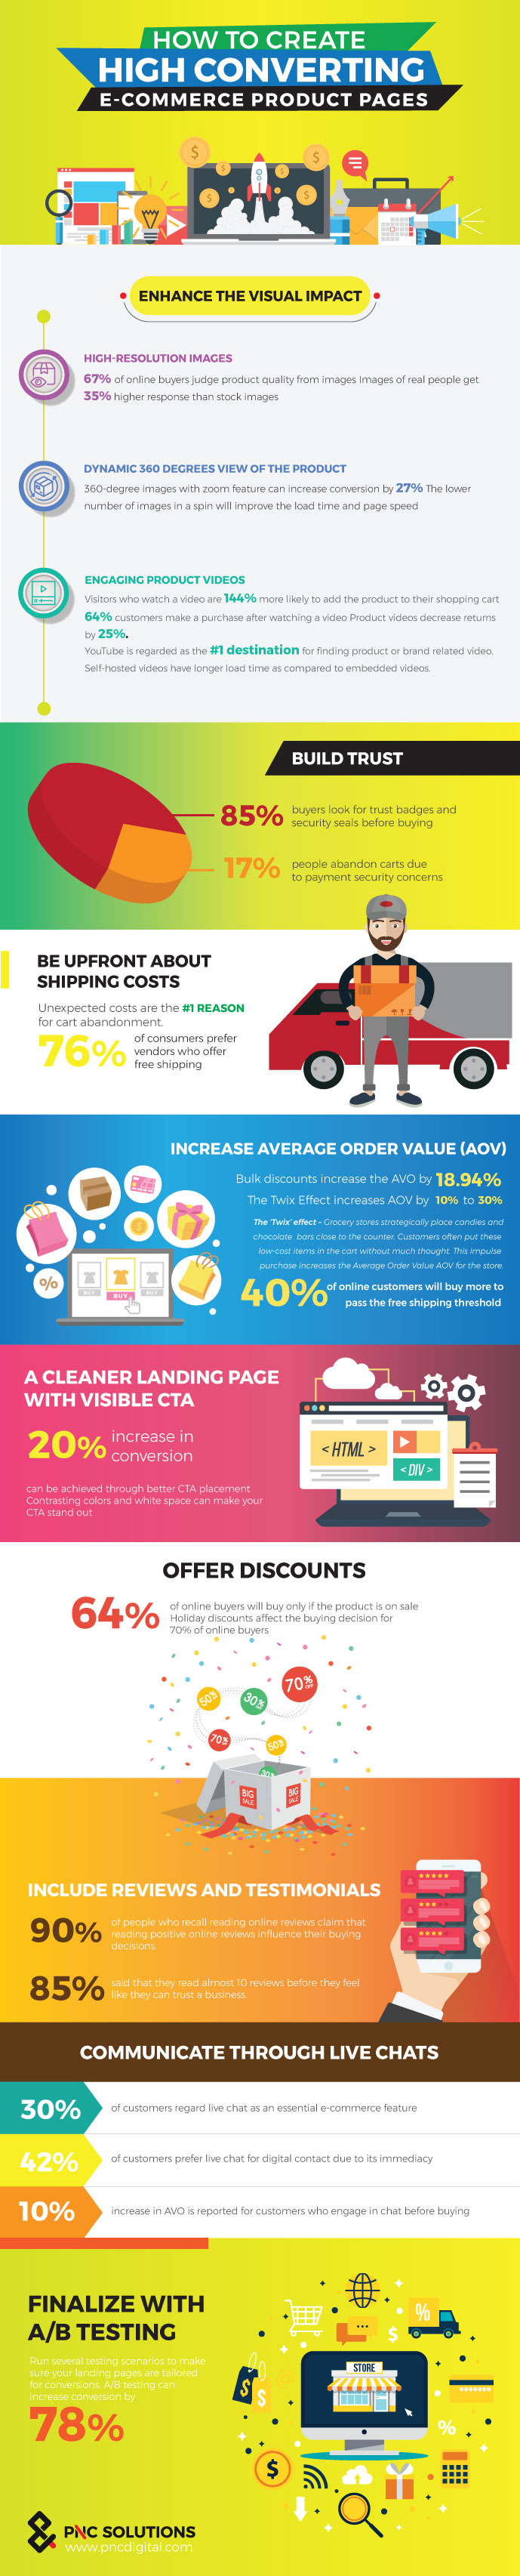 How-To-Create-High-Converting-Ecommerce-Product-Pages-infographic-plaza